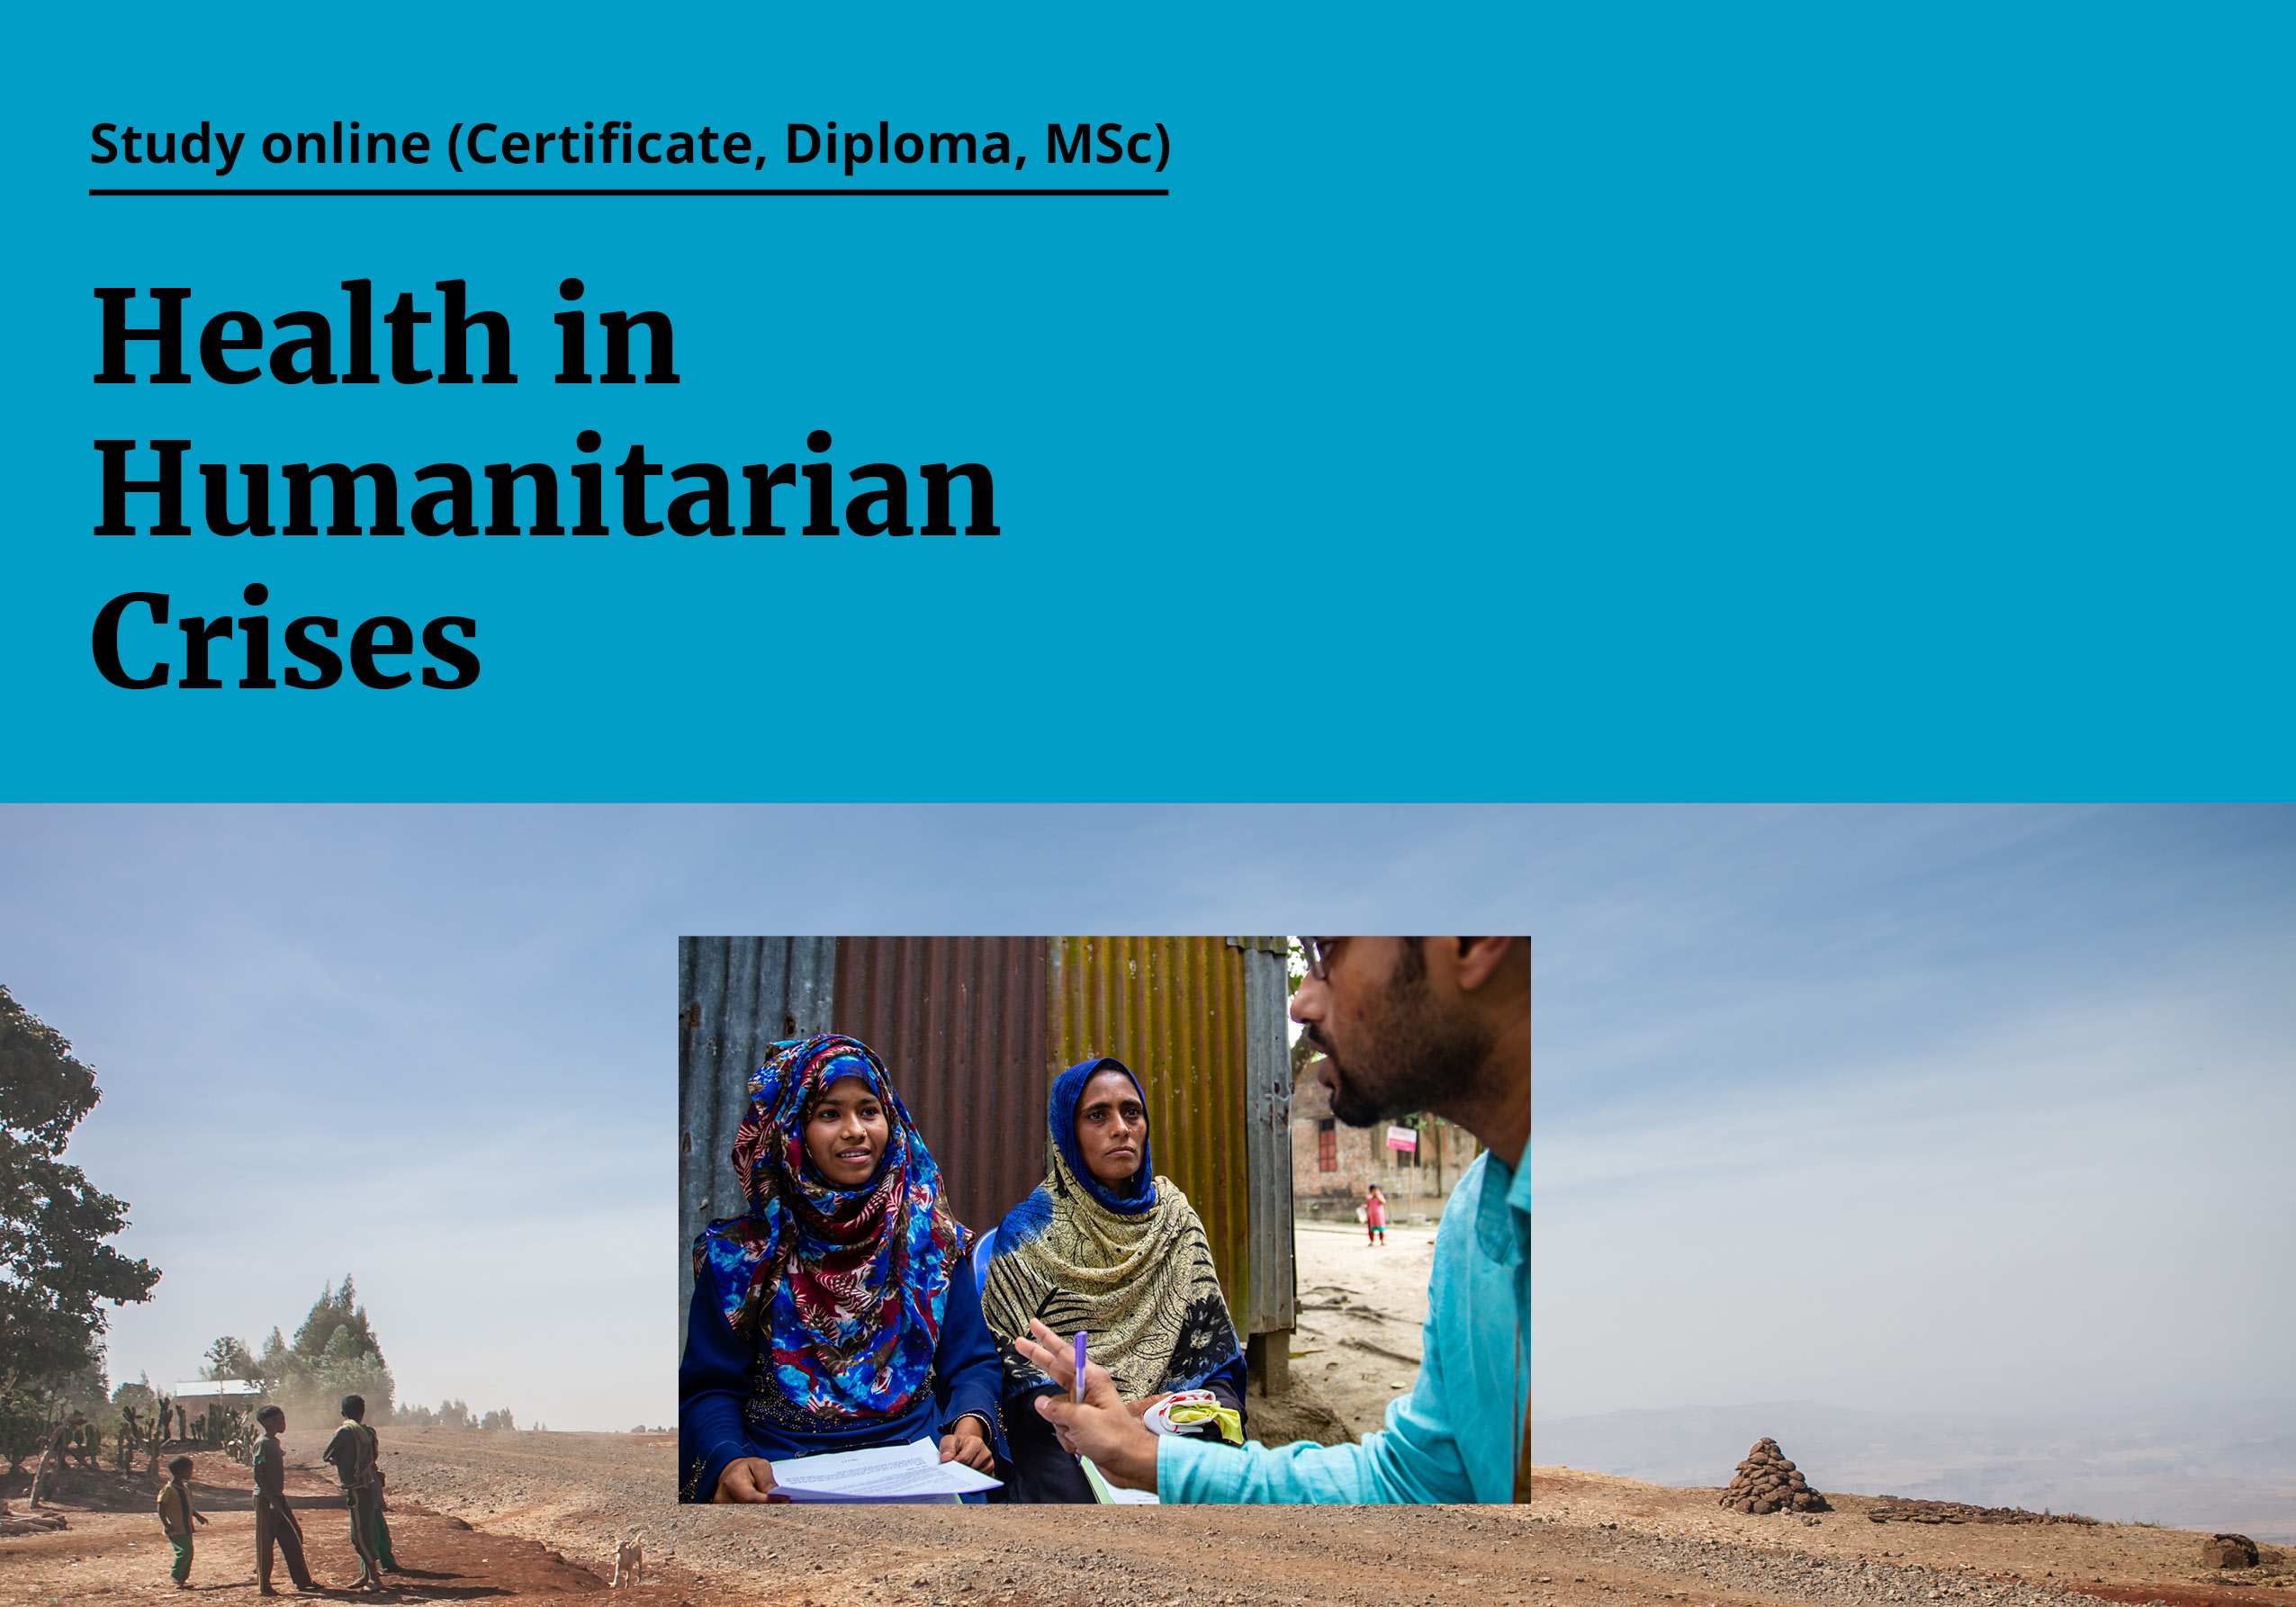 Health in Humanitarian Crises by distance learning 